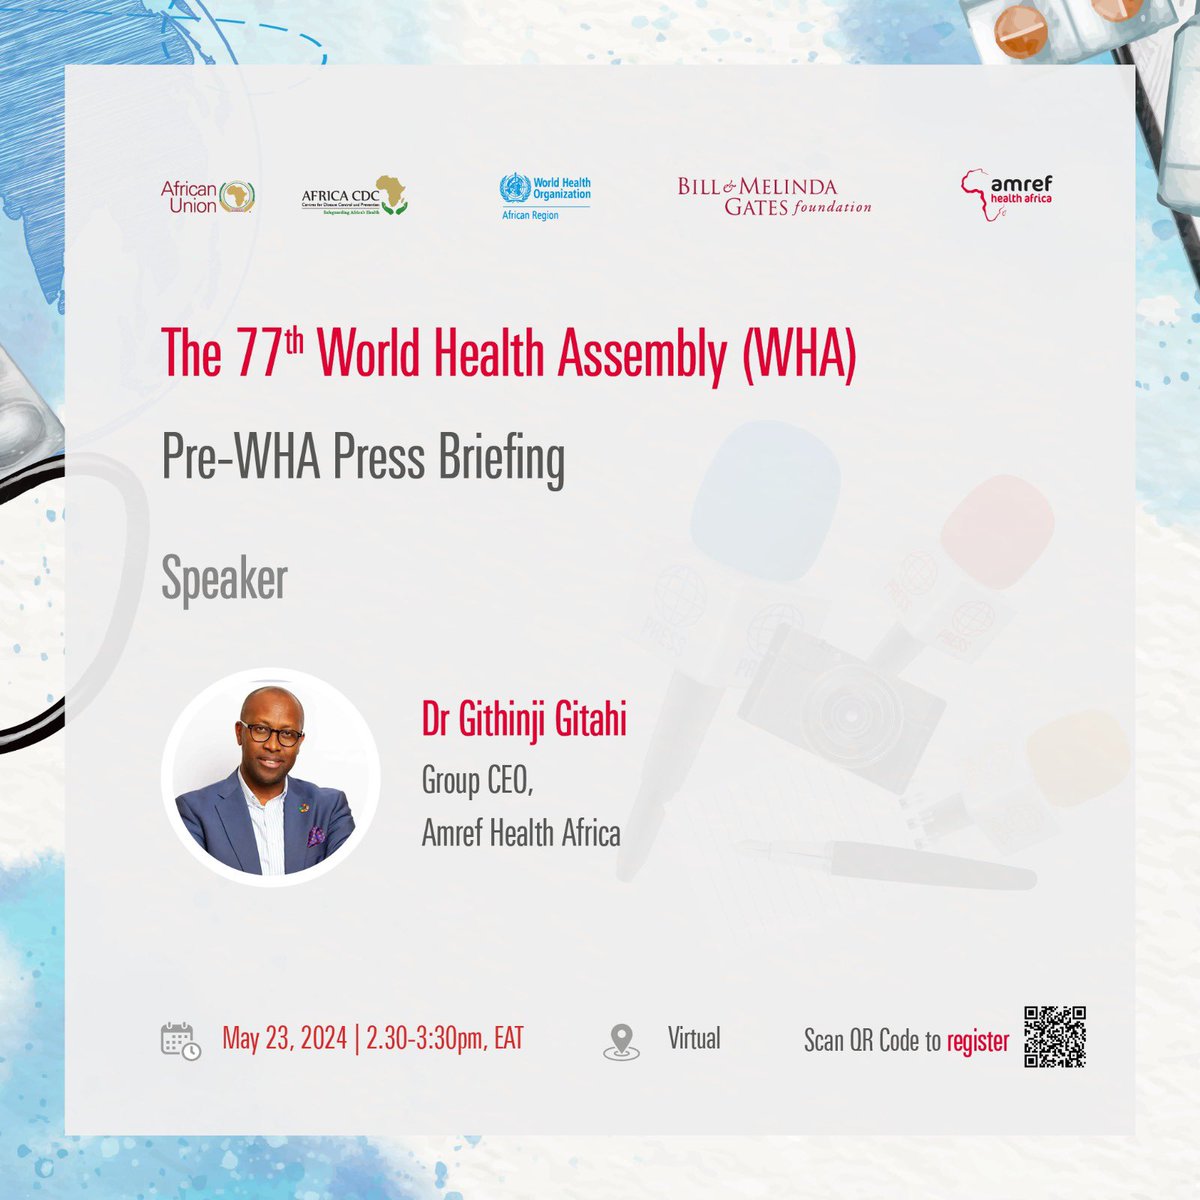 Join the global health community tomorrow. The 77th World Health Assembly pre-Press Briefing, moderated by Dr. Mercy Mwangangi will be takeing place from 2:30-3:30 pm. Register now at: amref.zoom.us/webinar/regist… and be part of shaping the future of healthcare. #AmrefAtWHA77